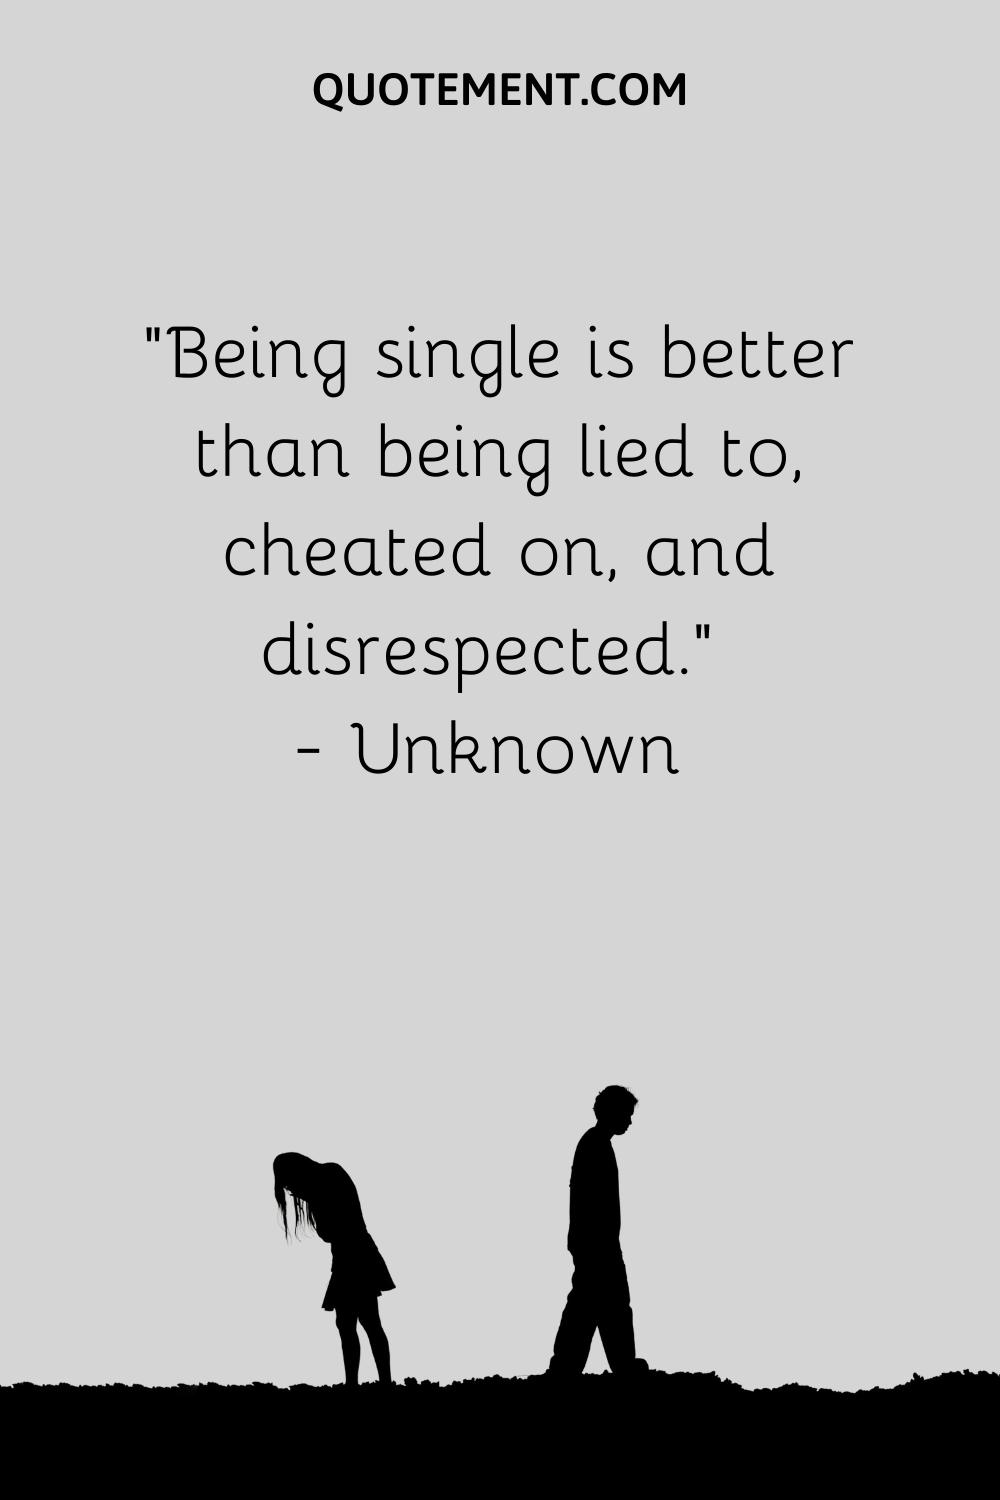 Being single is better than being lied to, cheated on, and disrespected.